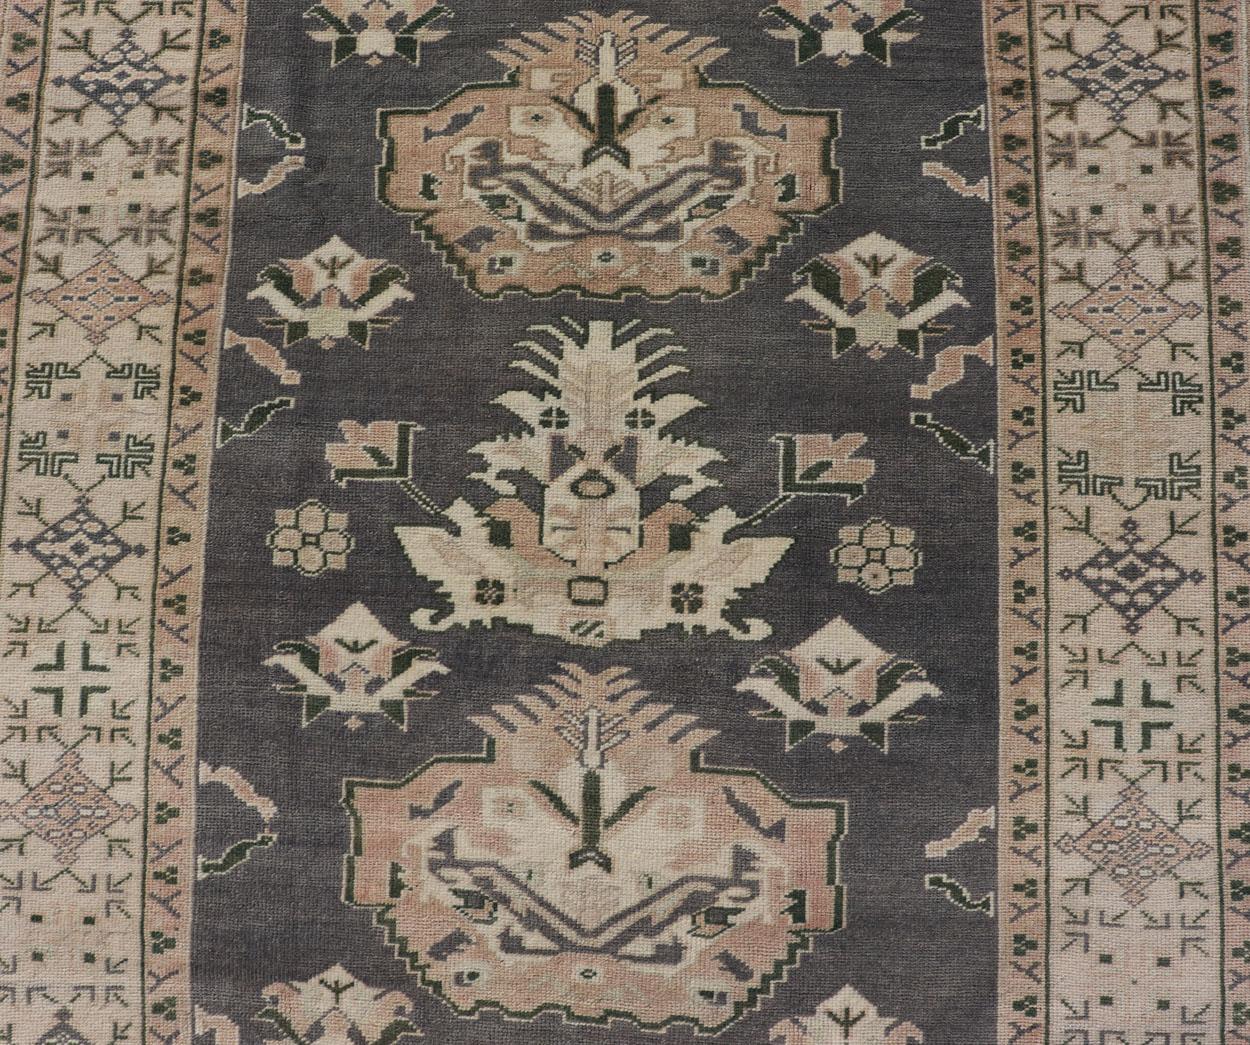 Turkish Oushak Rug Vintage with Three Floral Medallion Design In Blue and Cream In Good Condition For Sale In Atlanta, GA